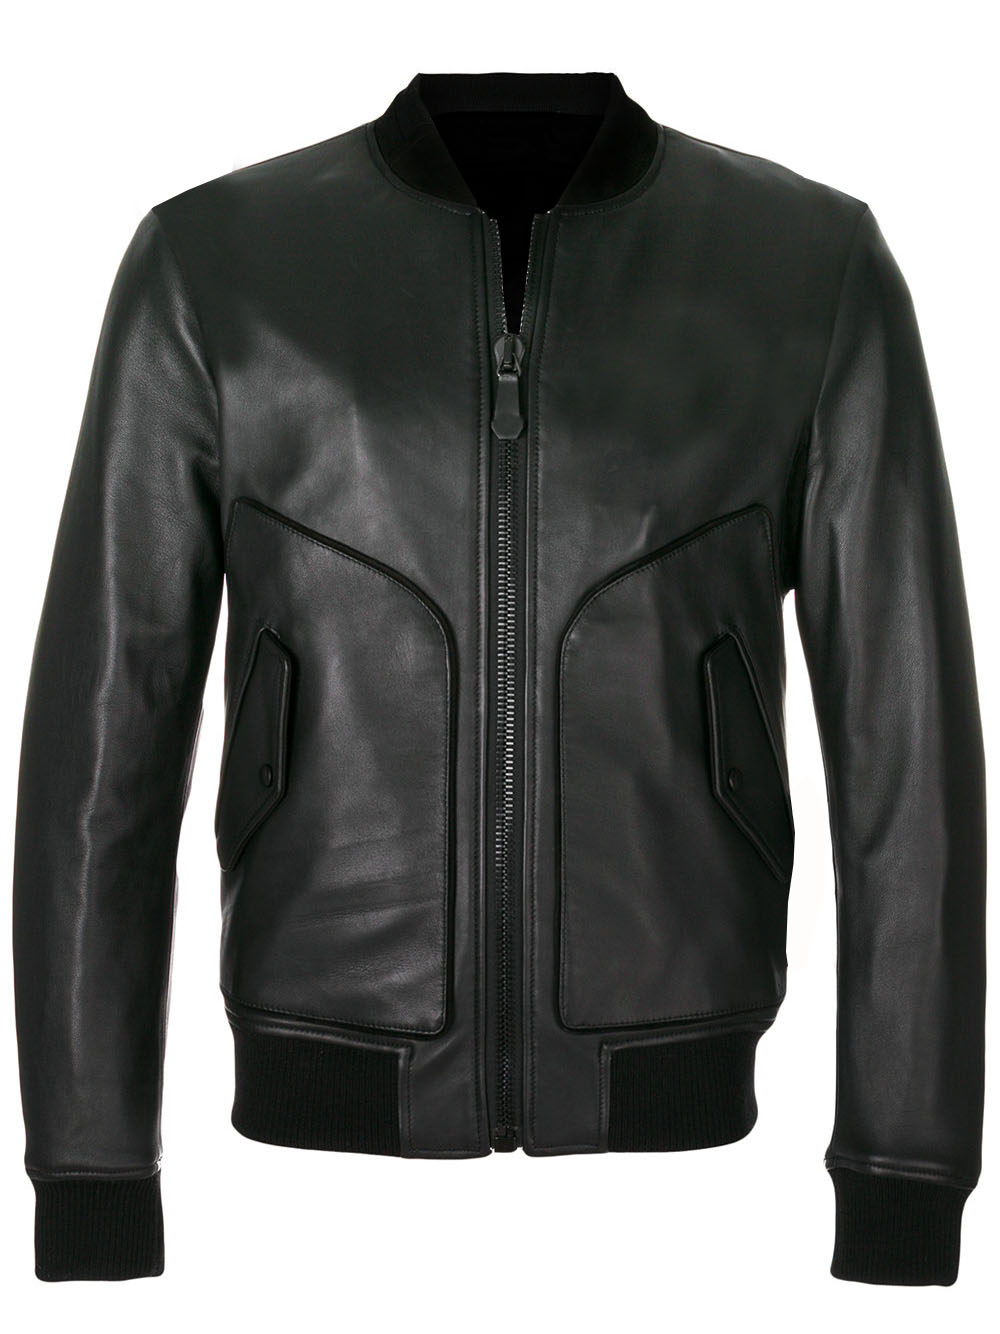 Mens Faux Leather Bomber Jackets for Sale | VearFit